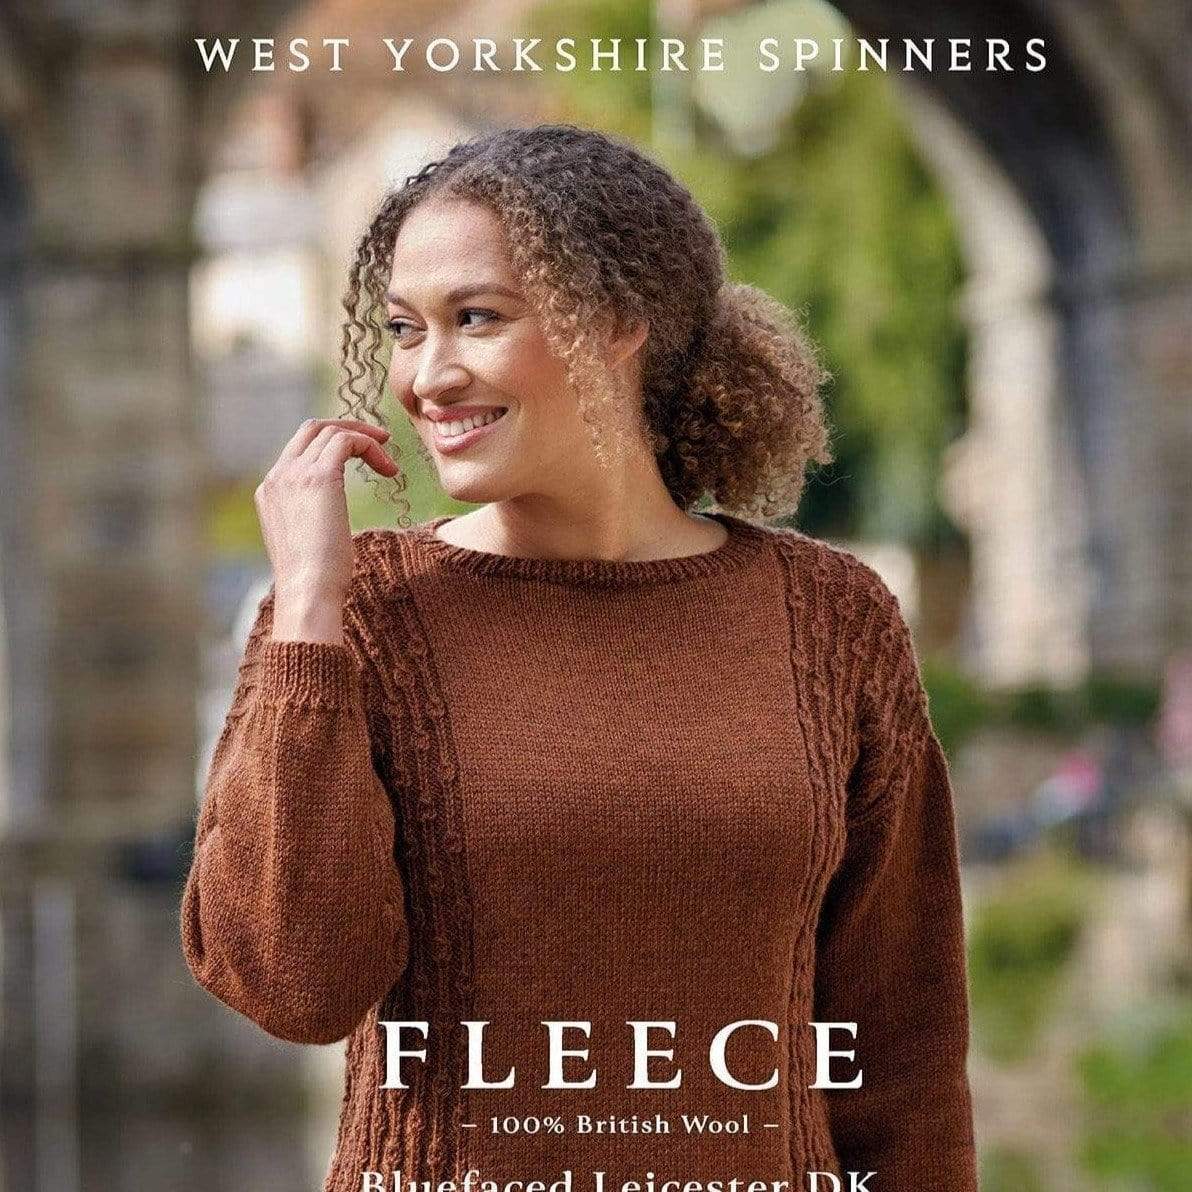 Fleece - Family Collection Pattern Book - West Yorkshire Spinners